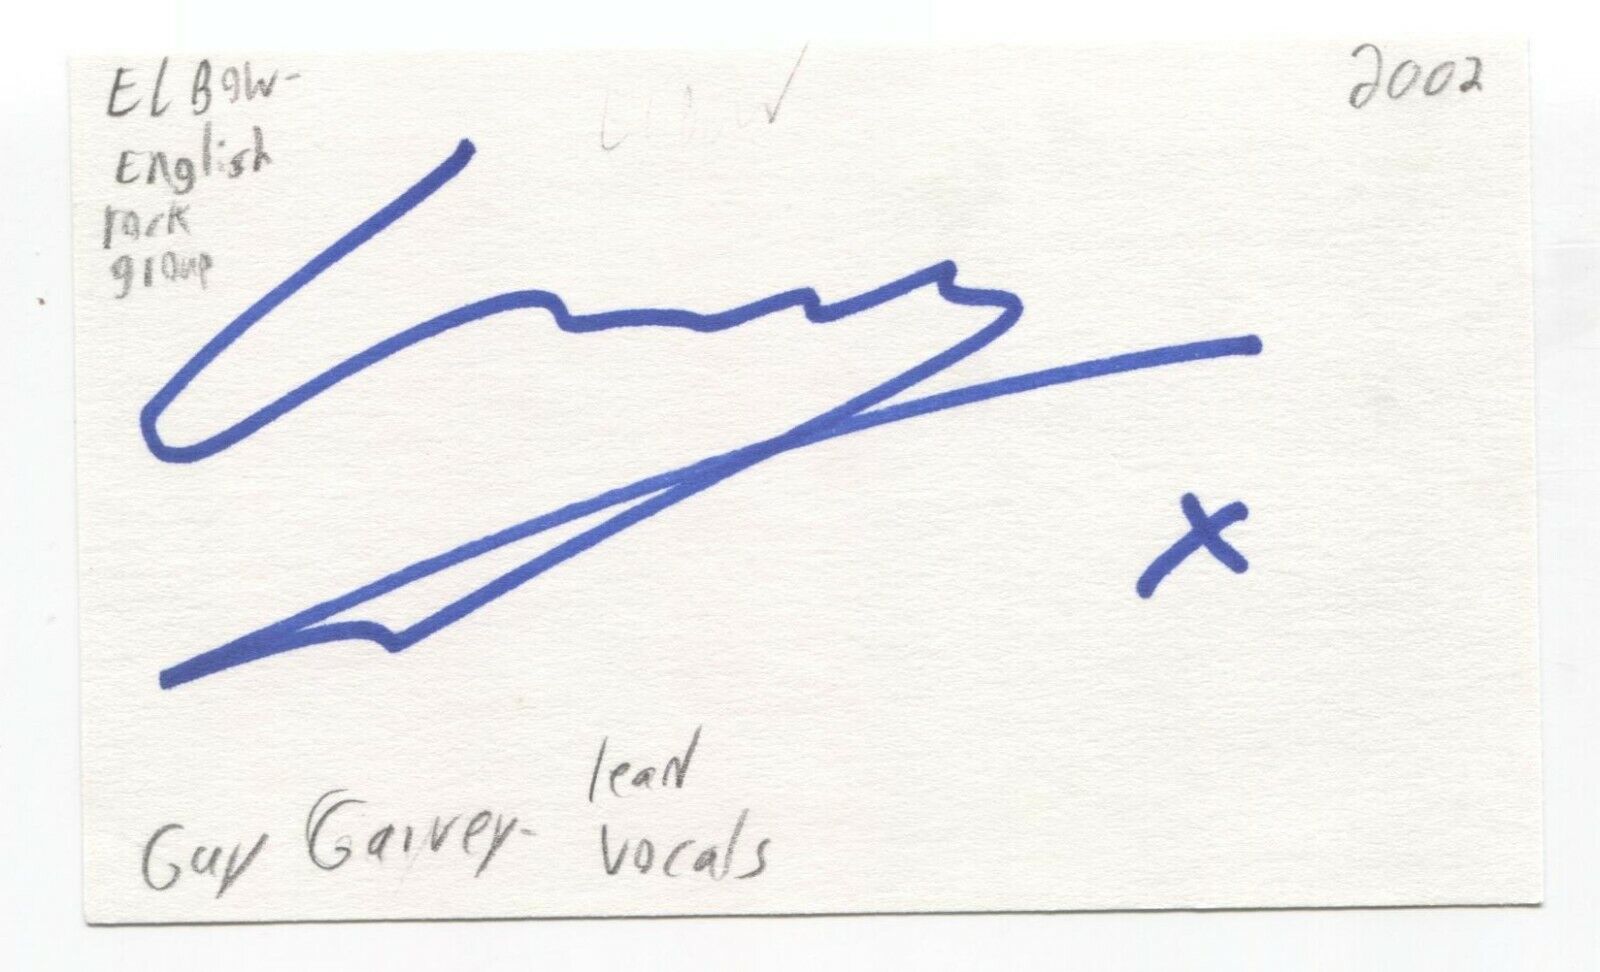 Elbow - Guy Harvey Signed 3x5 Index Card Autographed Signature Band